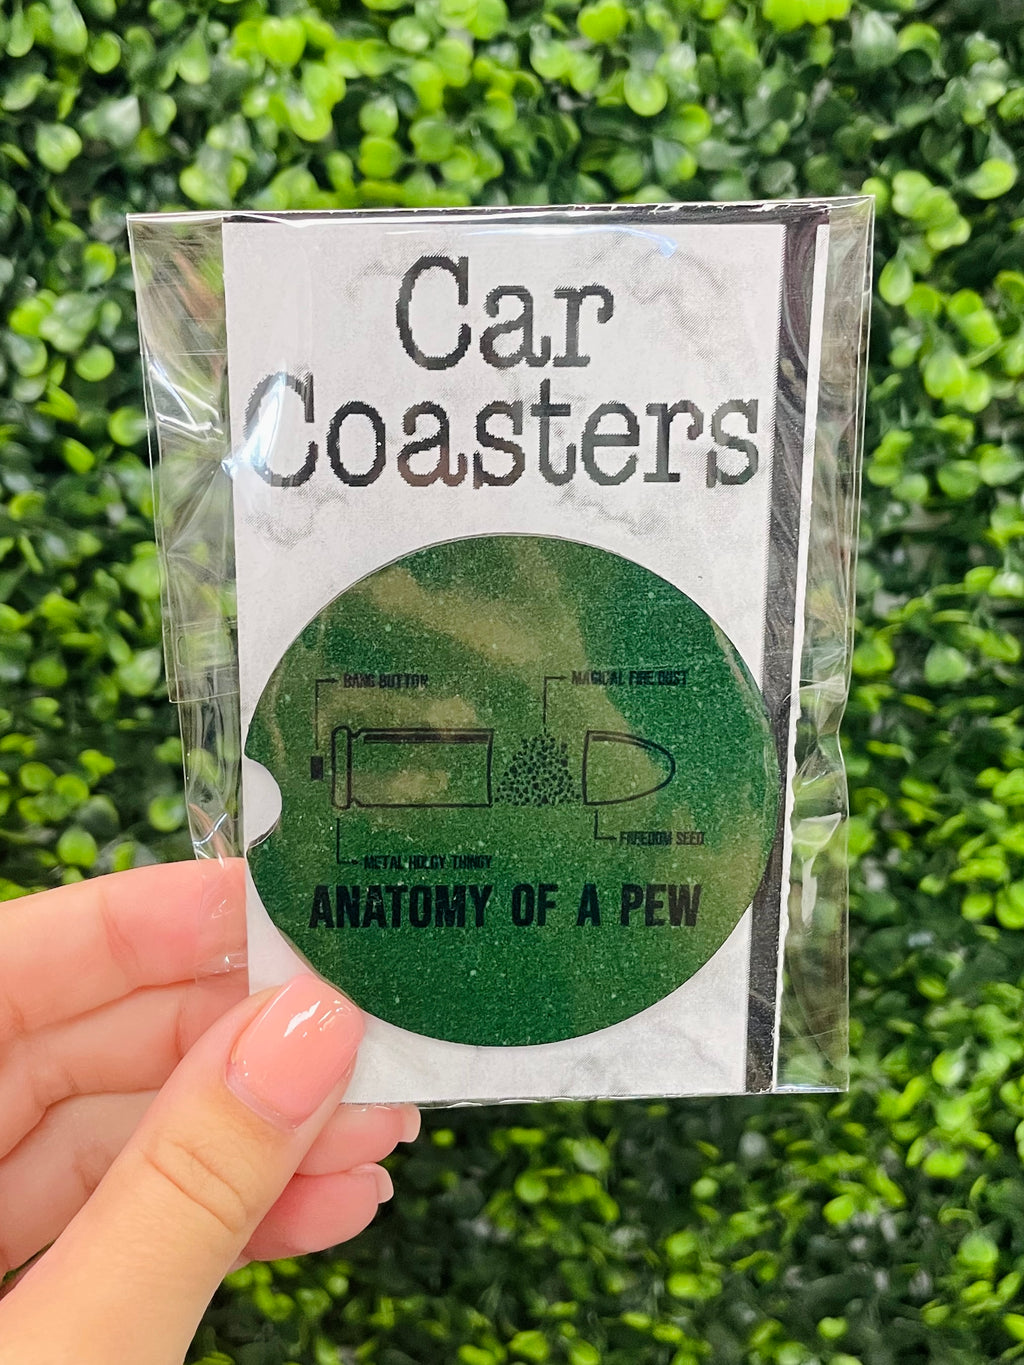 Has Dad been cozying up to his cars a little too much? Show him you care and get him an "Anatomy Of A Pew Car Coaster" this Father's Day! A quirky, humorous way to remind him of the real love in his life. A perfect gift for the modern patriarch!